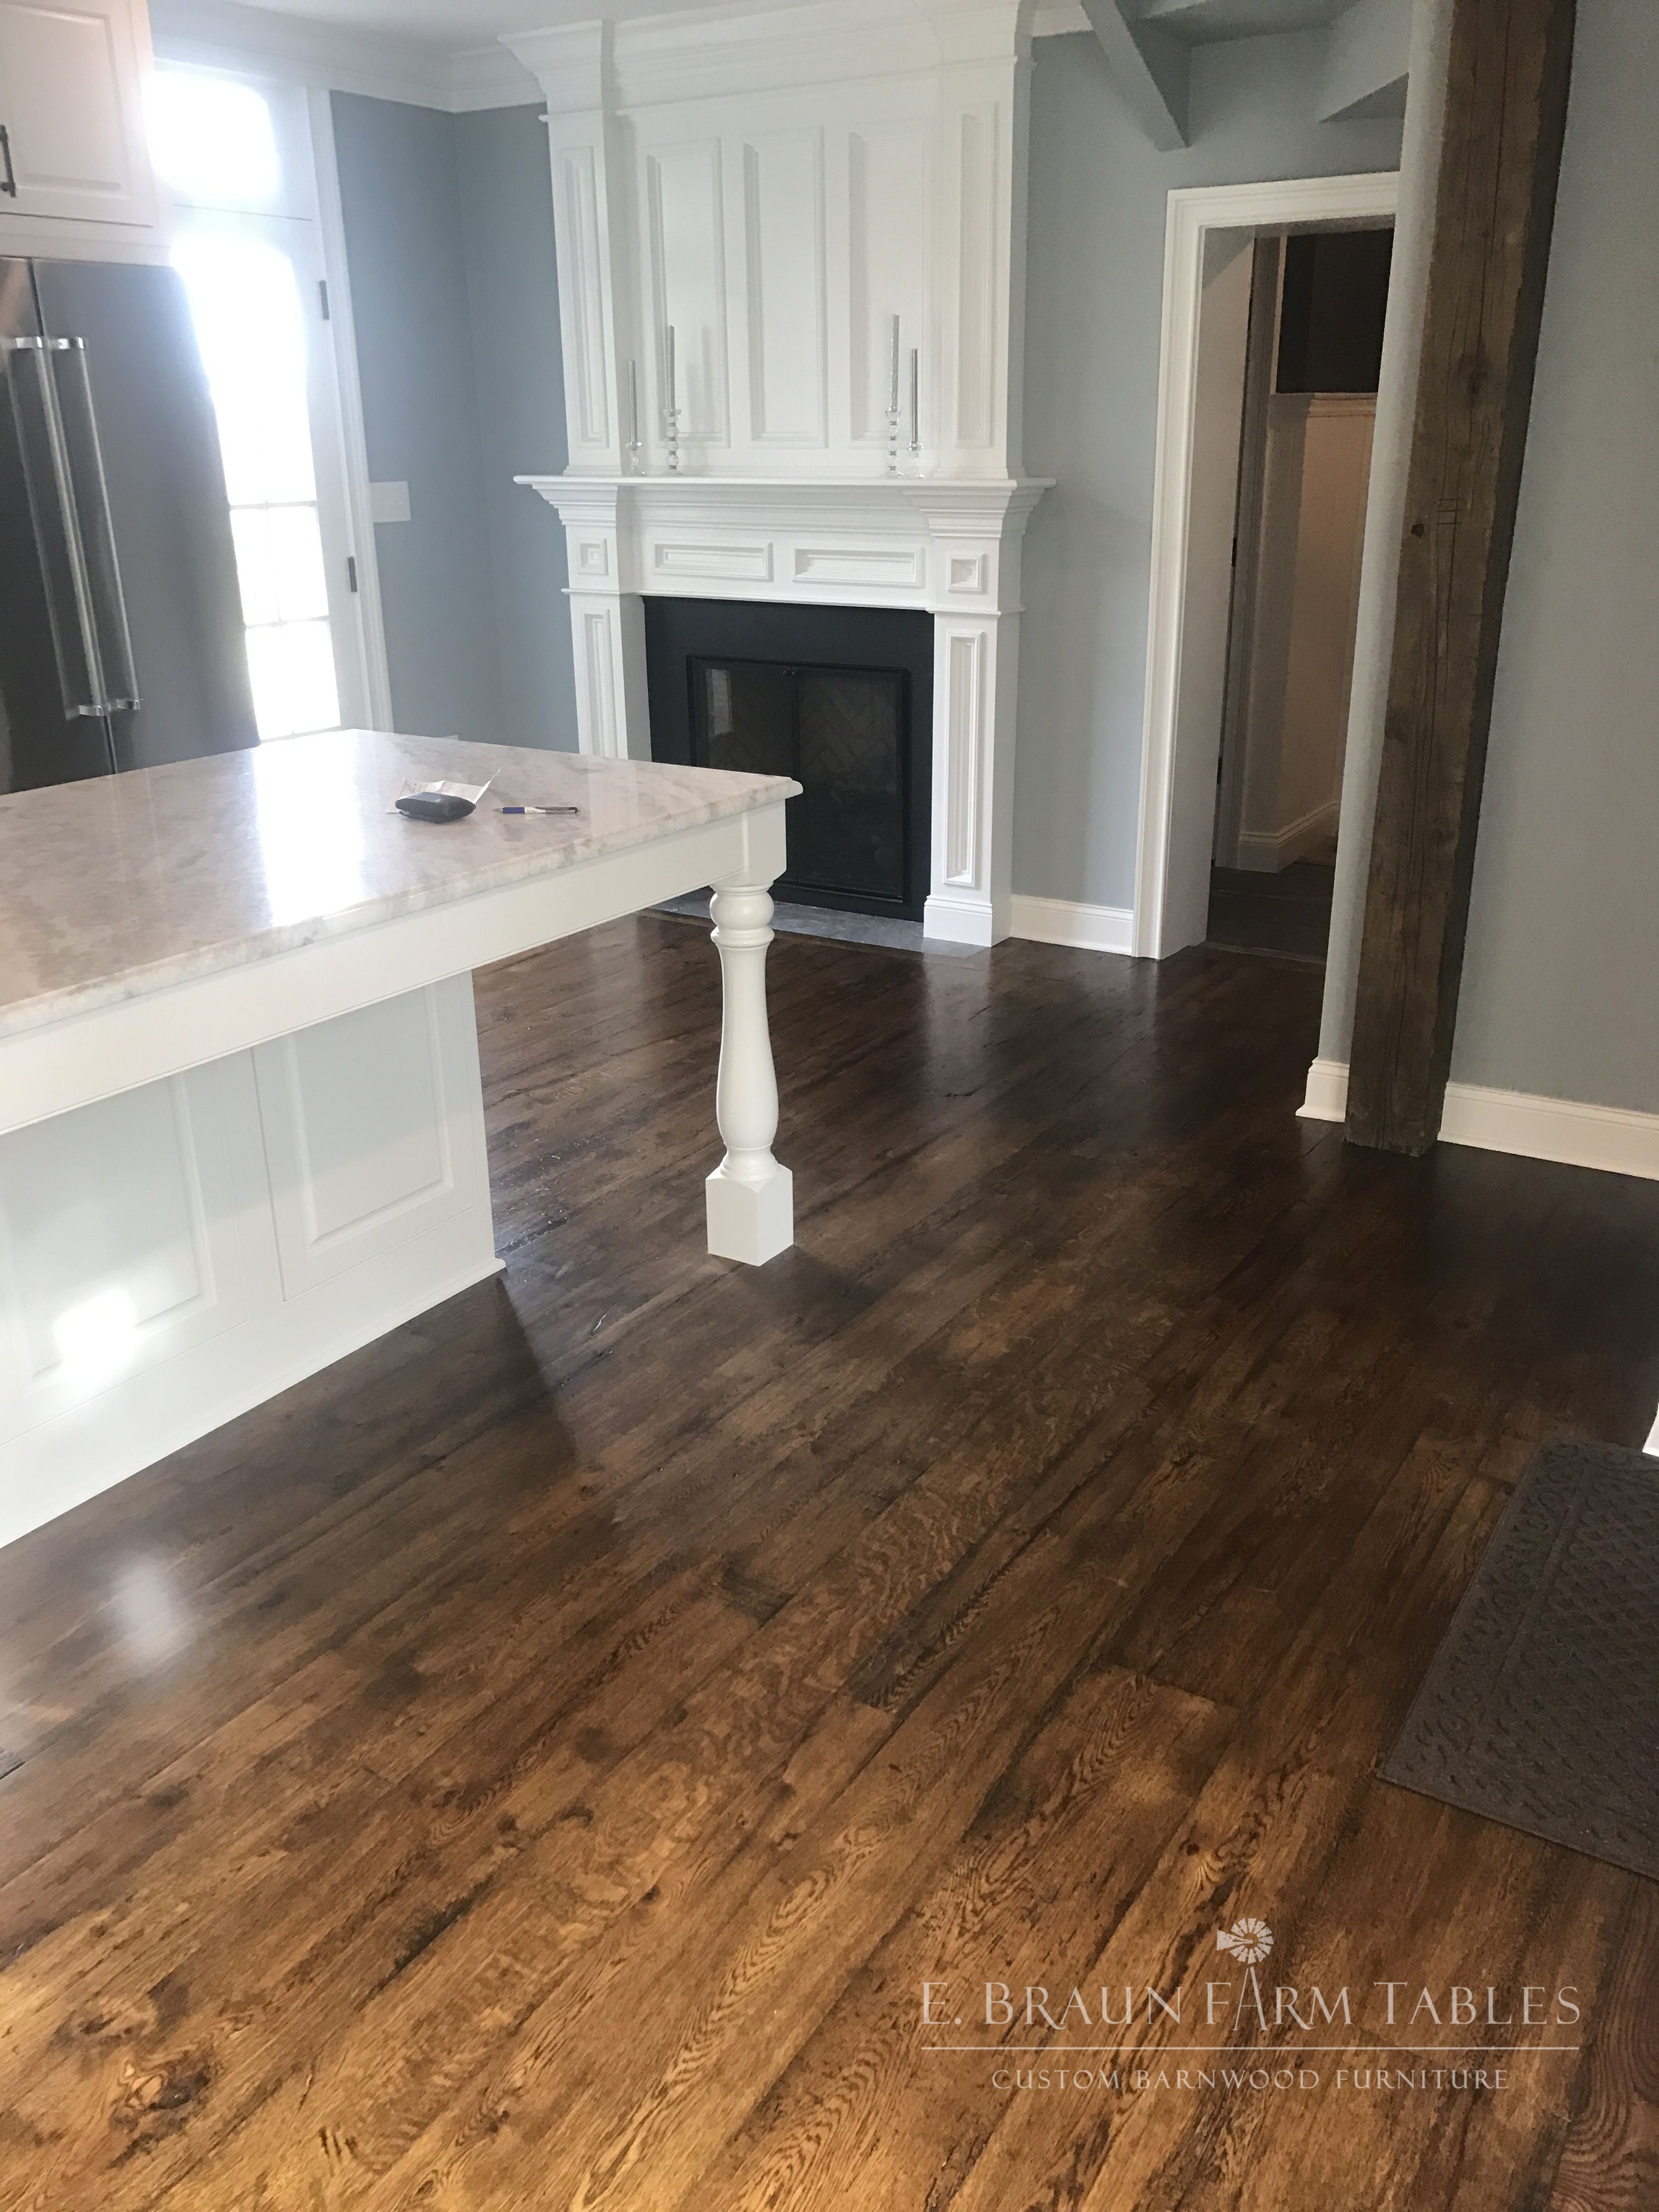 14 Unique Oak Hardwood Flooring with Pegs 2022 free download oak hardwood flooring with pegs of reclaimed white oak barn wood floor stained finished and with regard to reclaimed white oak barn wood floor stained finished and installed a 2017 e braun f